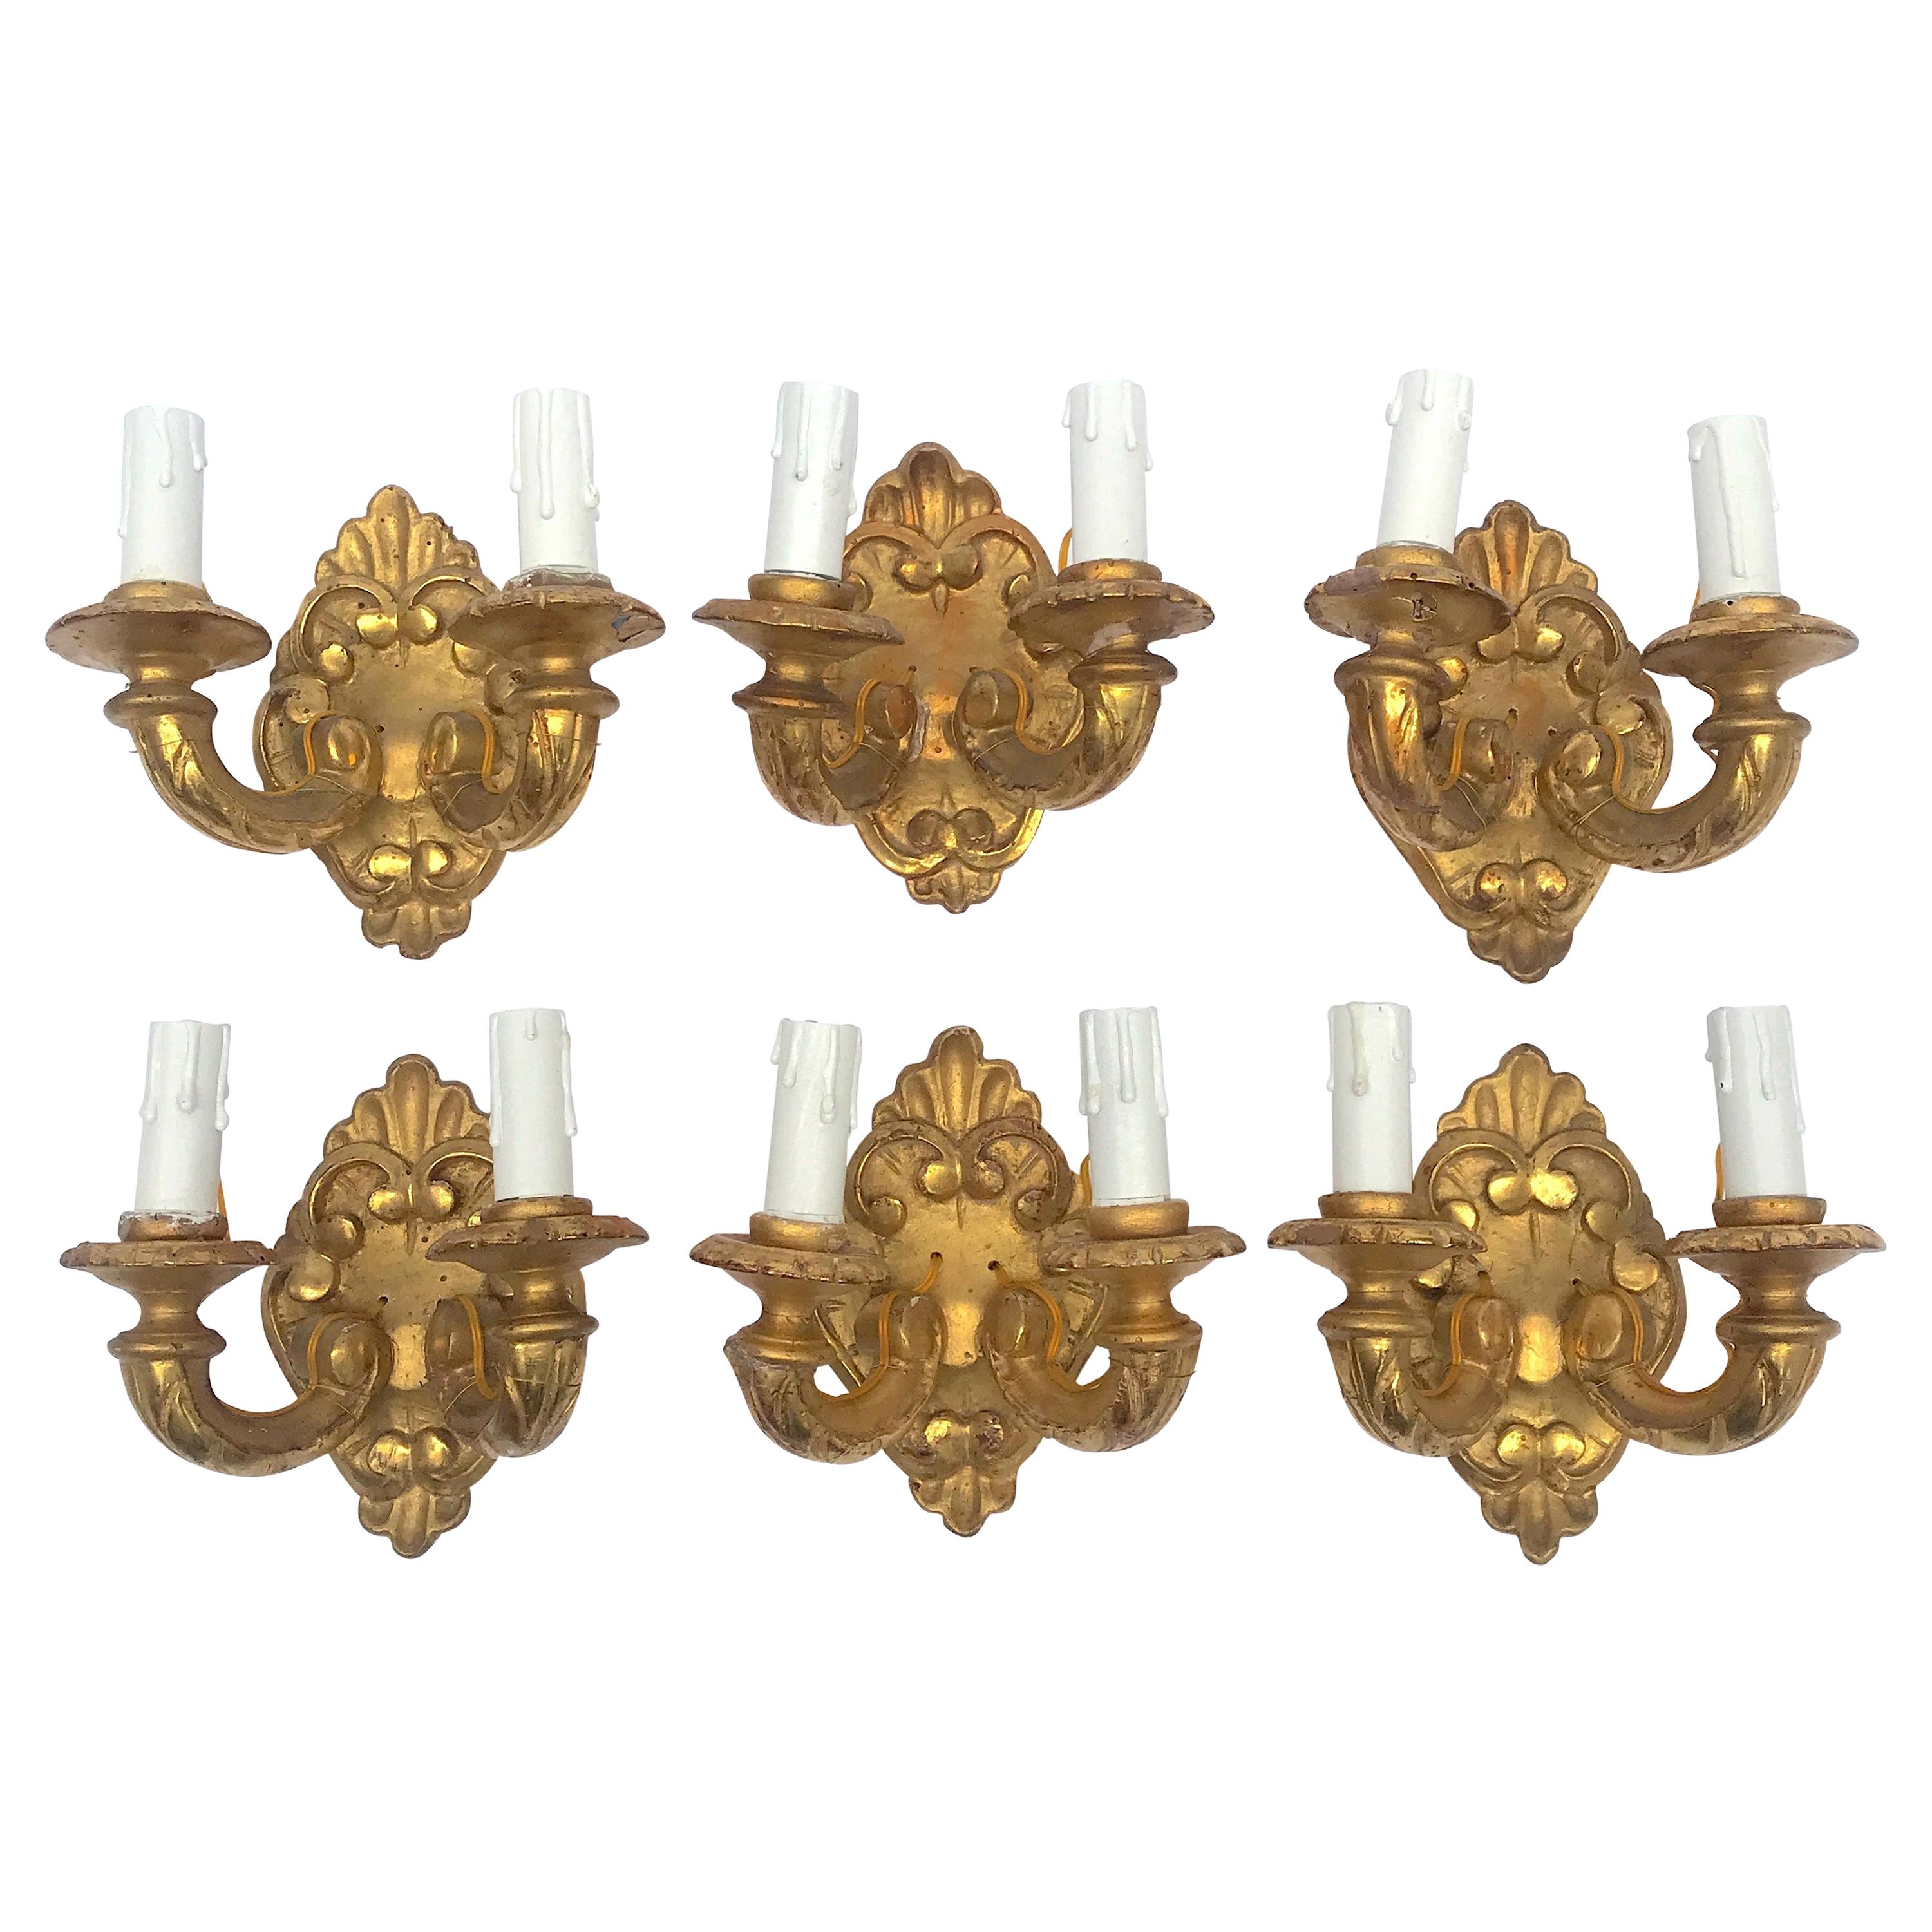 Six Italian Gilded Sconces Six Giltwood Two-Armed Wall Lights, 19th Century